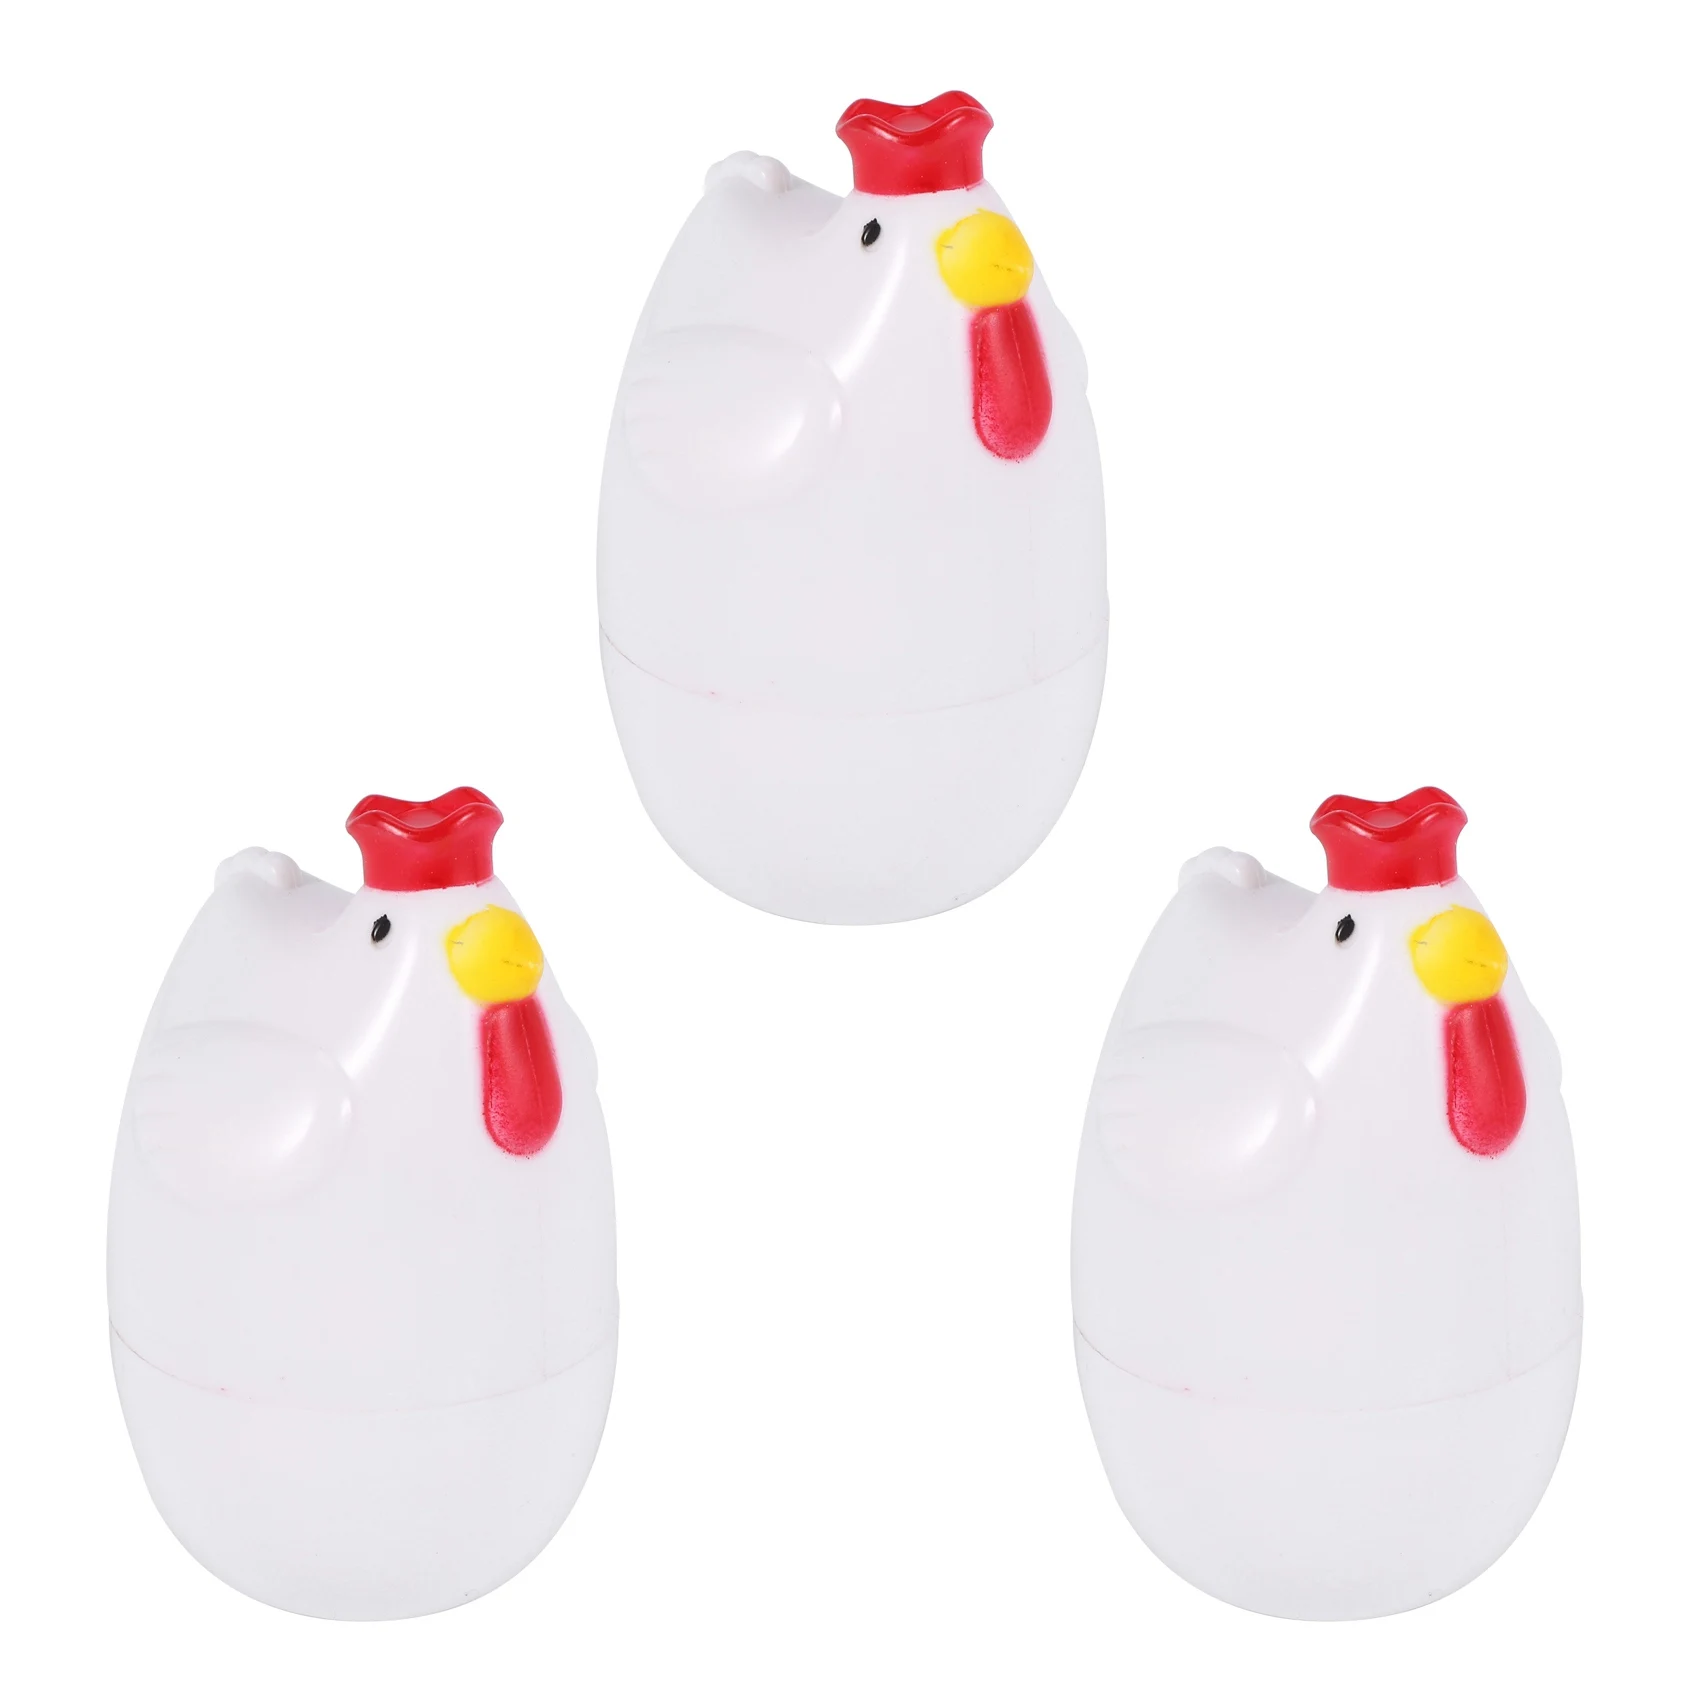 

3X Chick-Shaped 1 Boiled Egg Steamer Steamer Pestle Microwave Egg Cooker Cooking Tools Kitchen Gadgets Accessories Tools